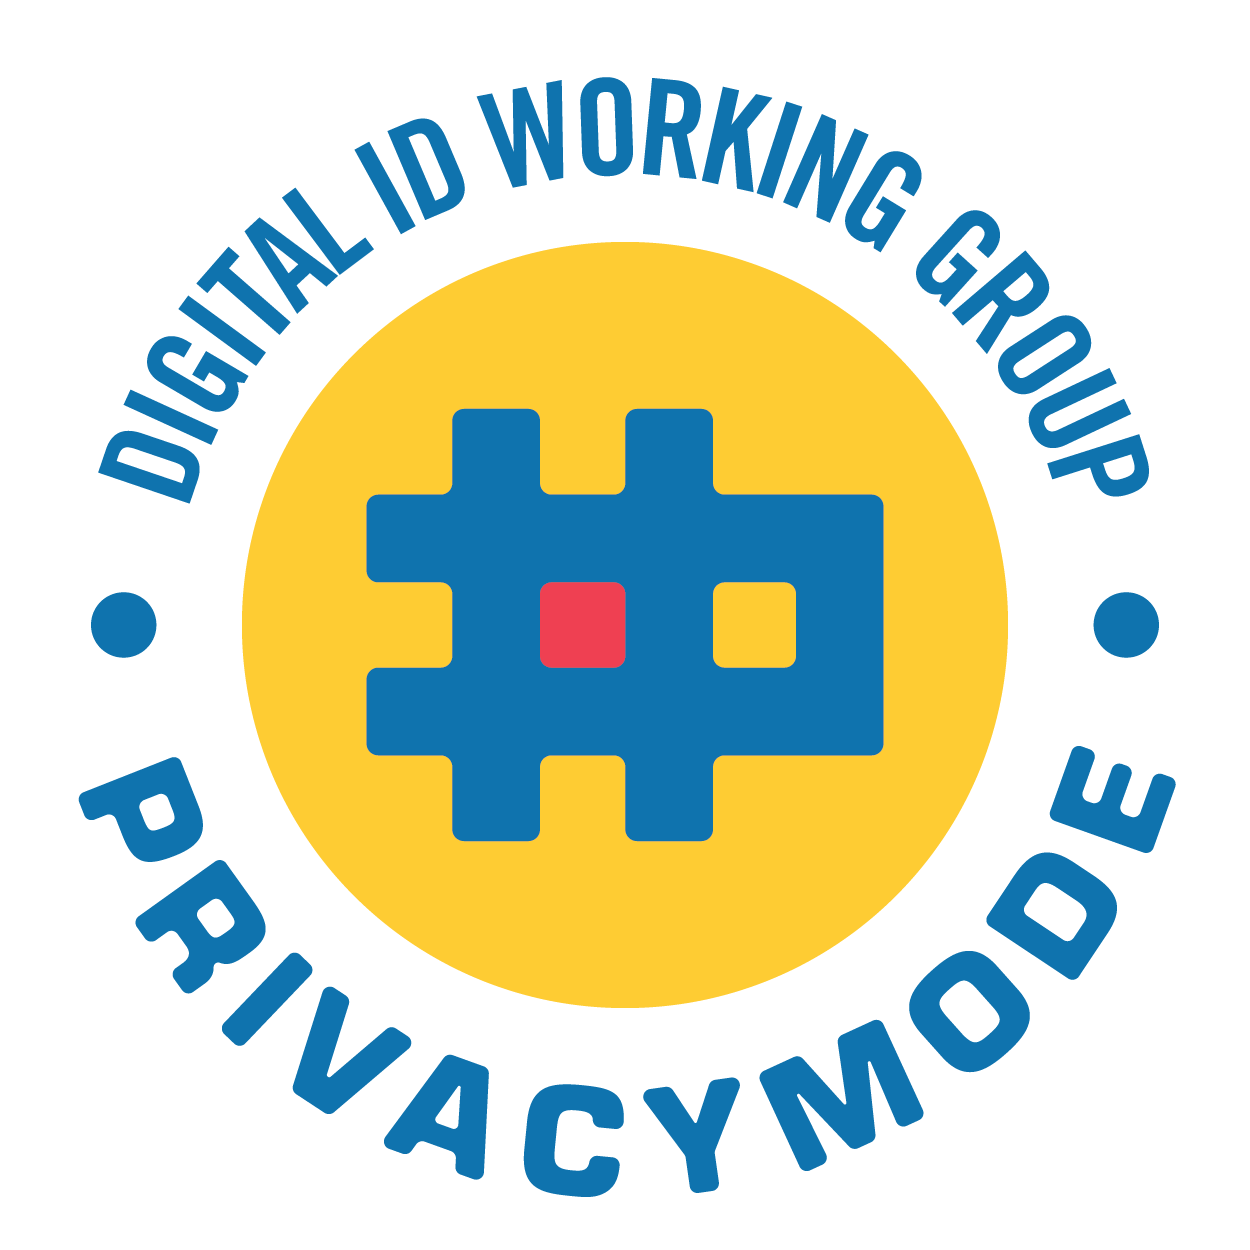 Digital ID and Identifiers working group